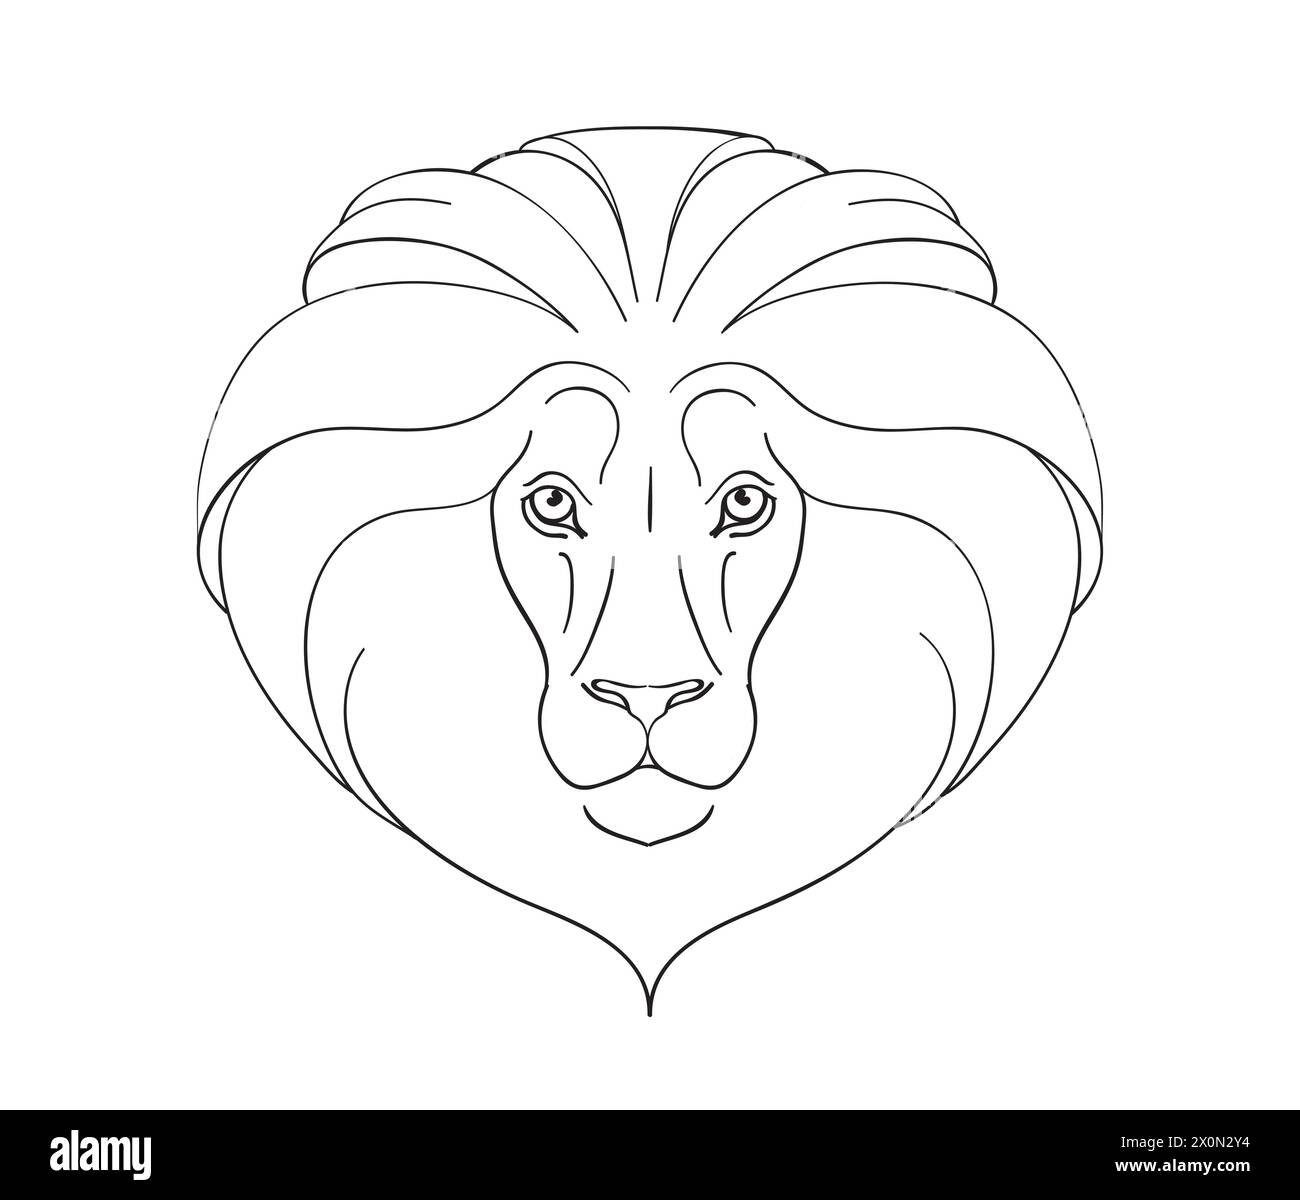 Lion head line drawing, vector icon, outline logo, zodiac symbol for astrology, minimalistic tattoo, wild animal portrait isolated on white background Stock Vector